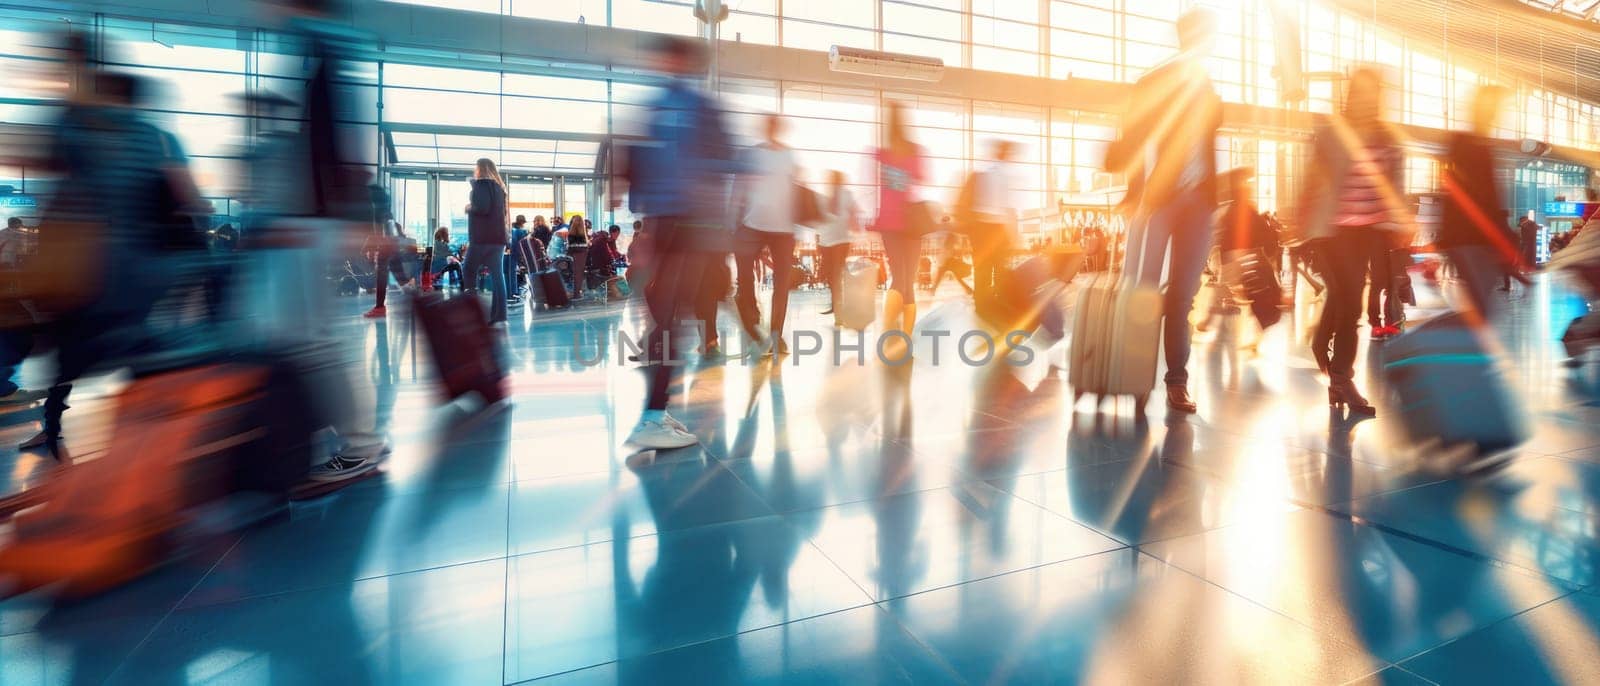 A busy airport with people walking around and carrying luggage by AI generated image.